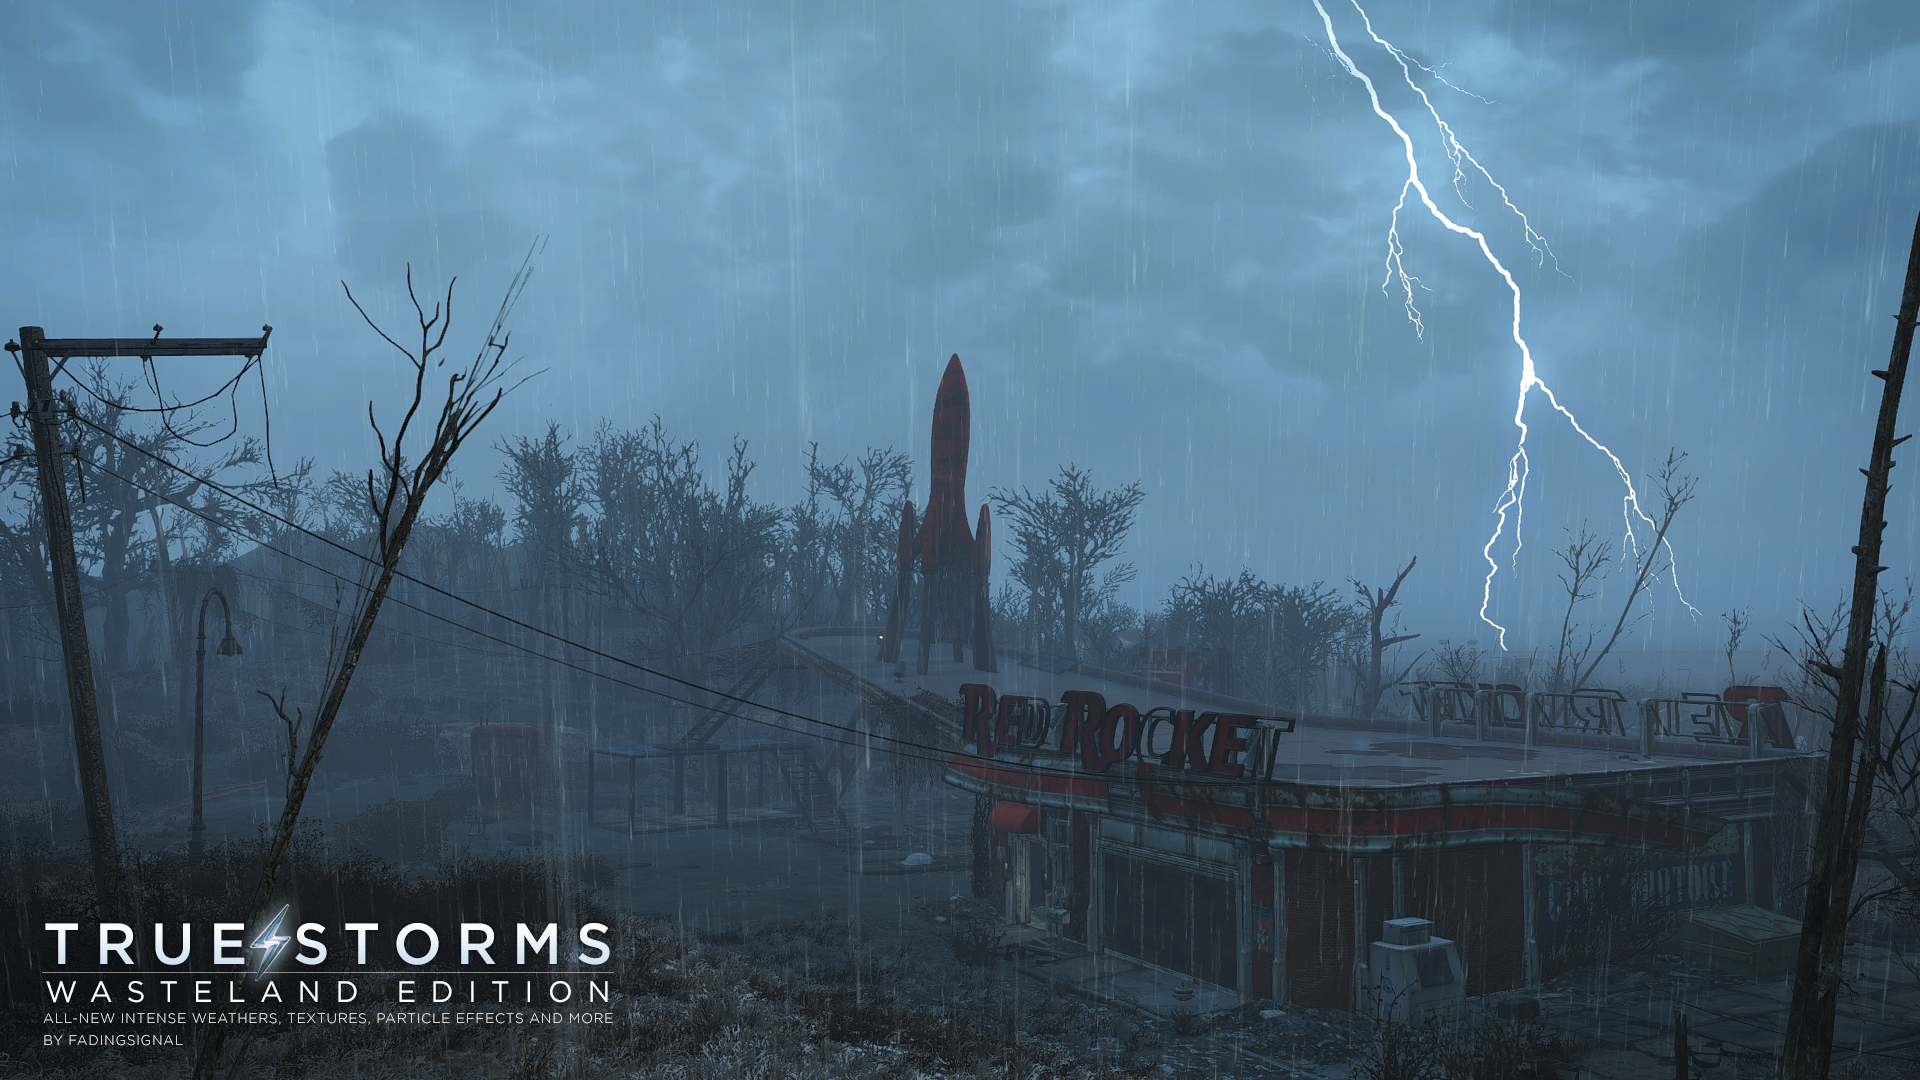 The Most Popular Fallout 4 Mod Right Now Is For…Extreme Weather